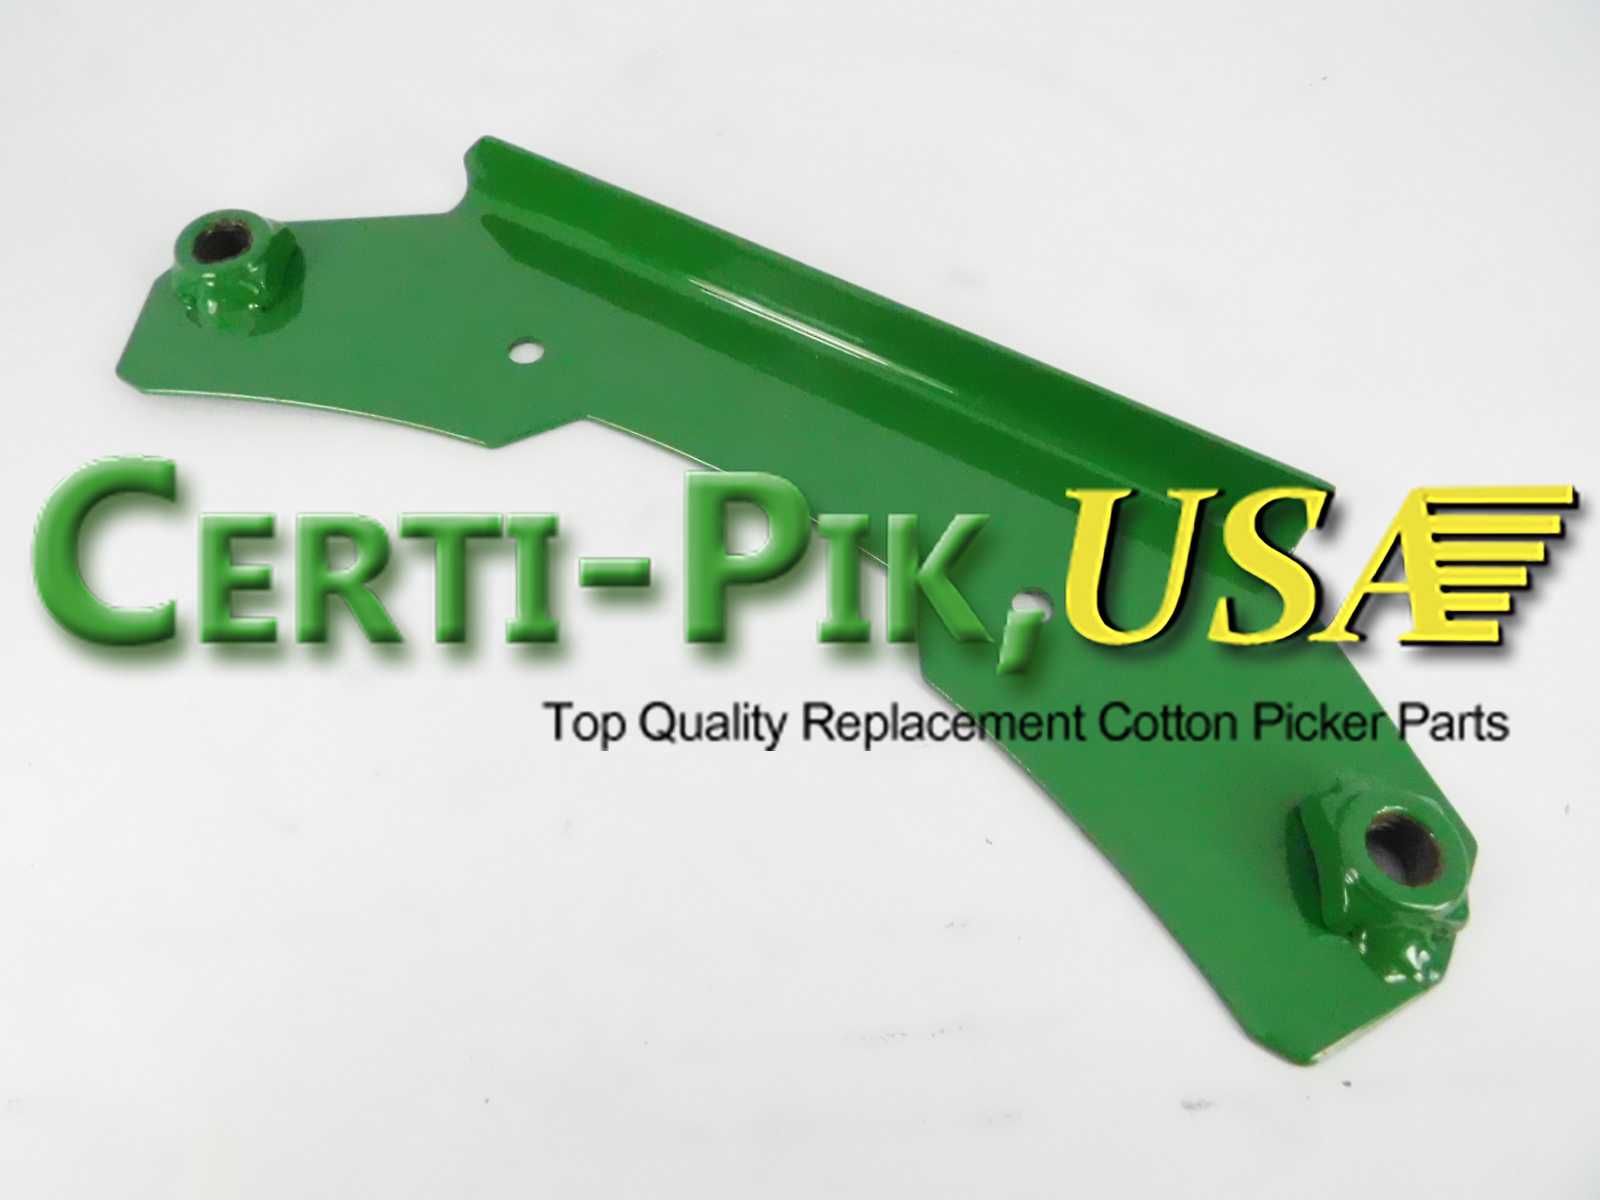 Picking Unit Cabinet: John Deere 9976-CP690 Upper Cabinet AN273686 (73686) for Sale